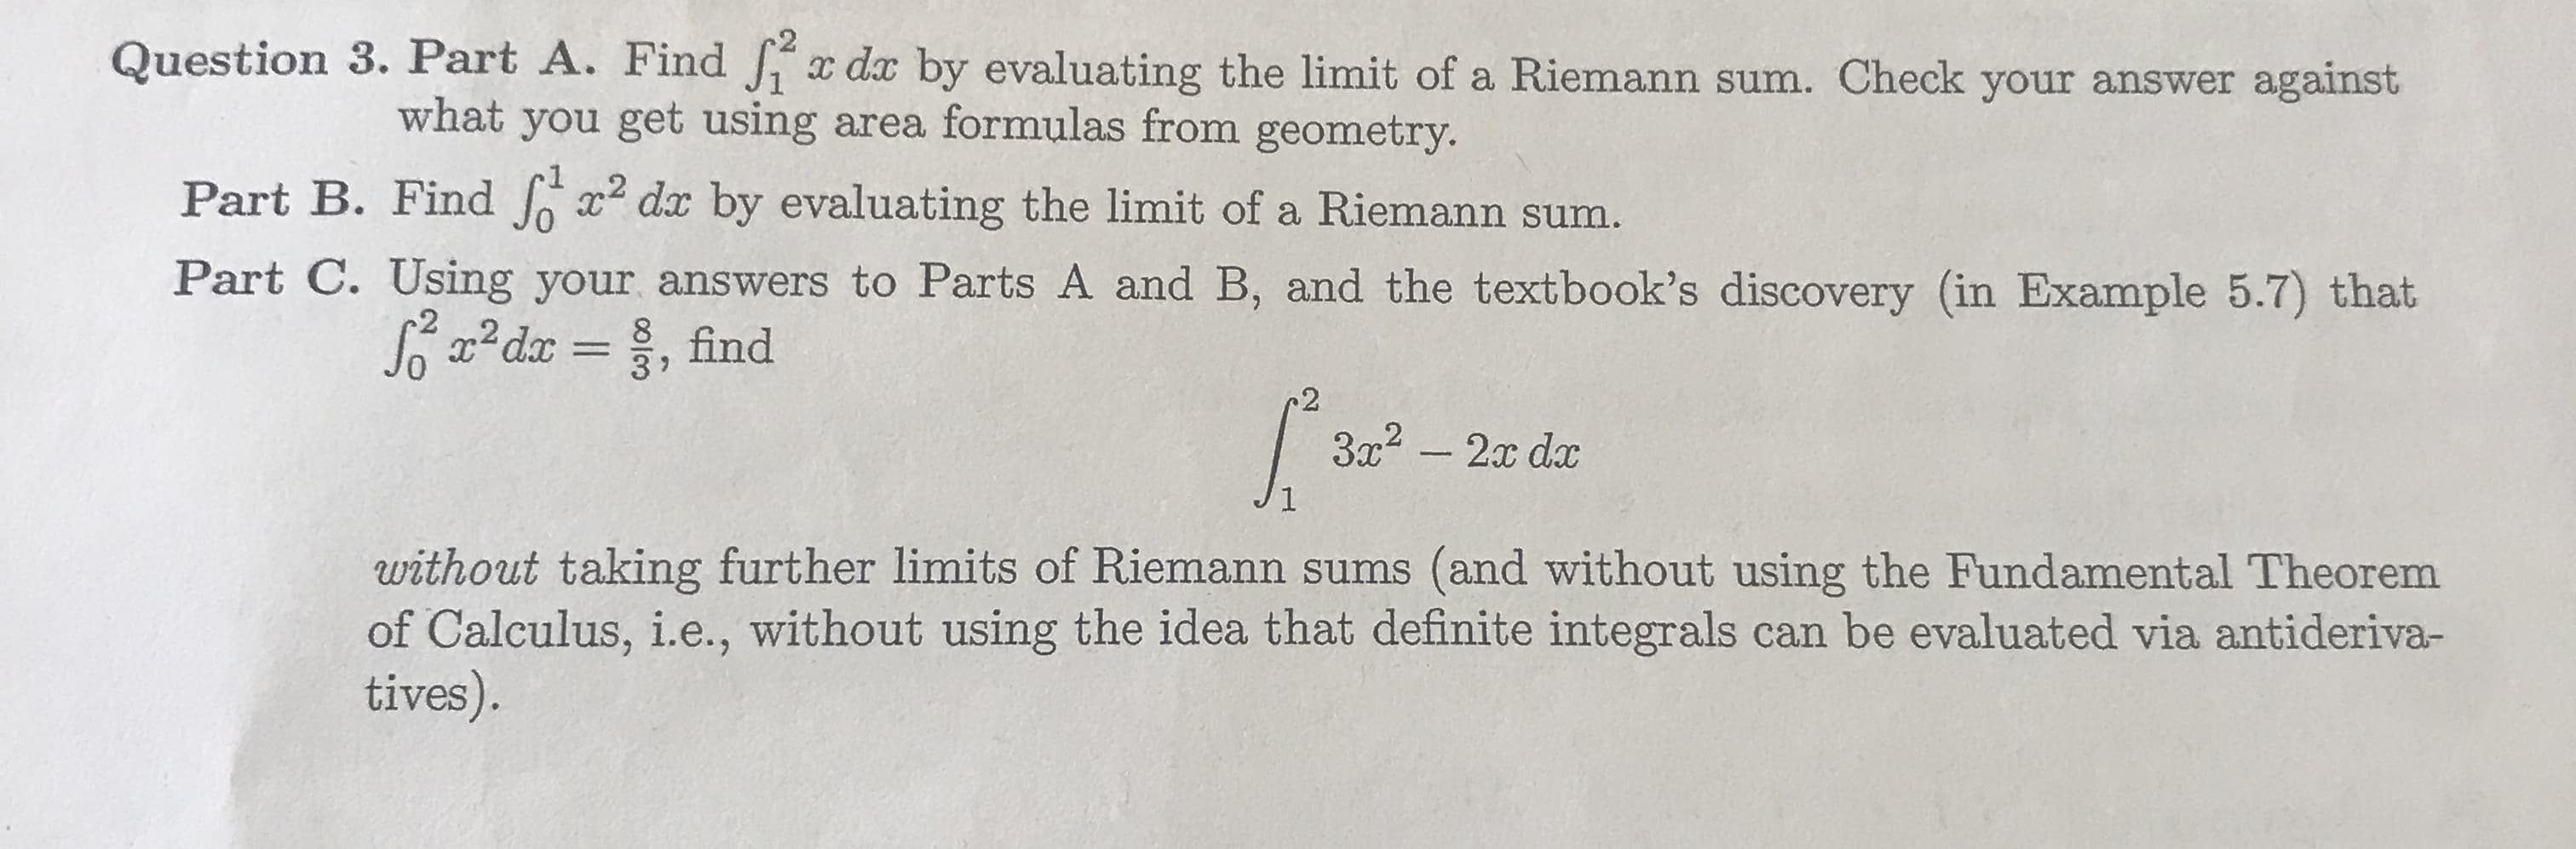 Question 3. Part A. Find
da by evaluating the limit of a Riemann sum. Check your answer against
what you get using area formulas from geometry
Part B. Find Jo 2 da by evaluating the limit of a Riemann sum.
Part C. Using your answers to Parts A and B, and the textbook's discovery (in Example 5.7) that
0
3 7
2
without taking further limits of Riemann sums (and without using the Fundamental Theorem
of Calculus, i.e., without using the idea that definite integrals can be evaluated via antideriva-
tives).
